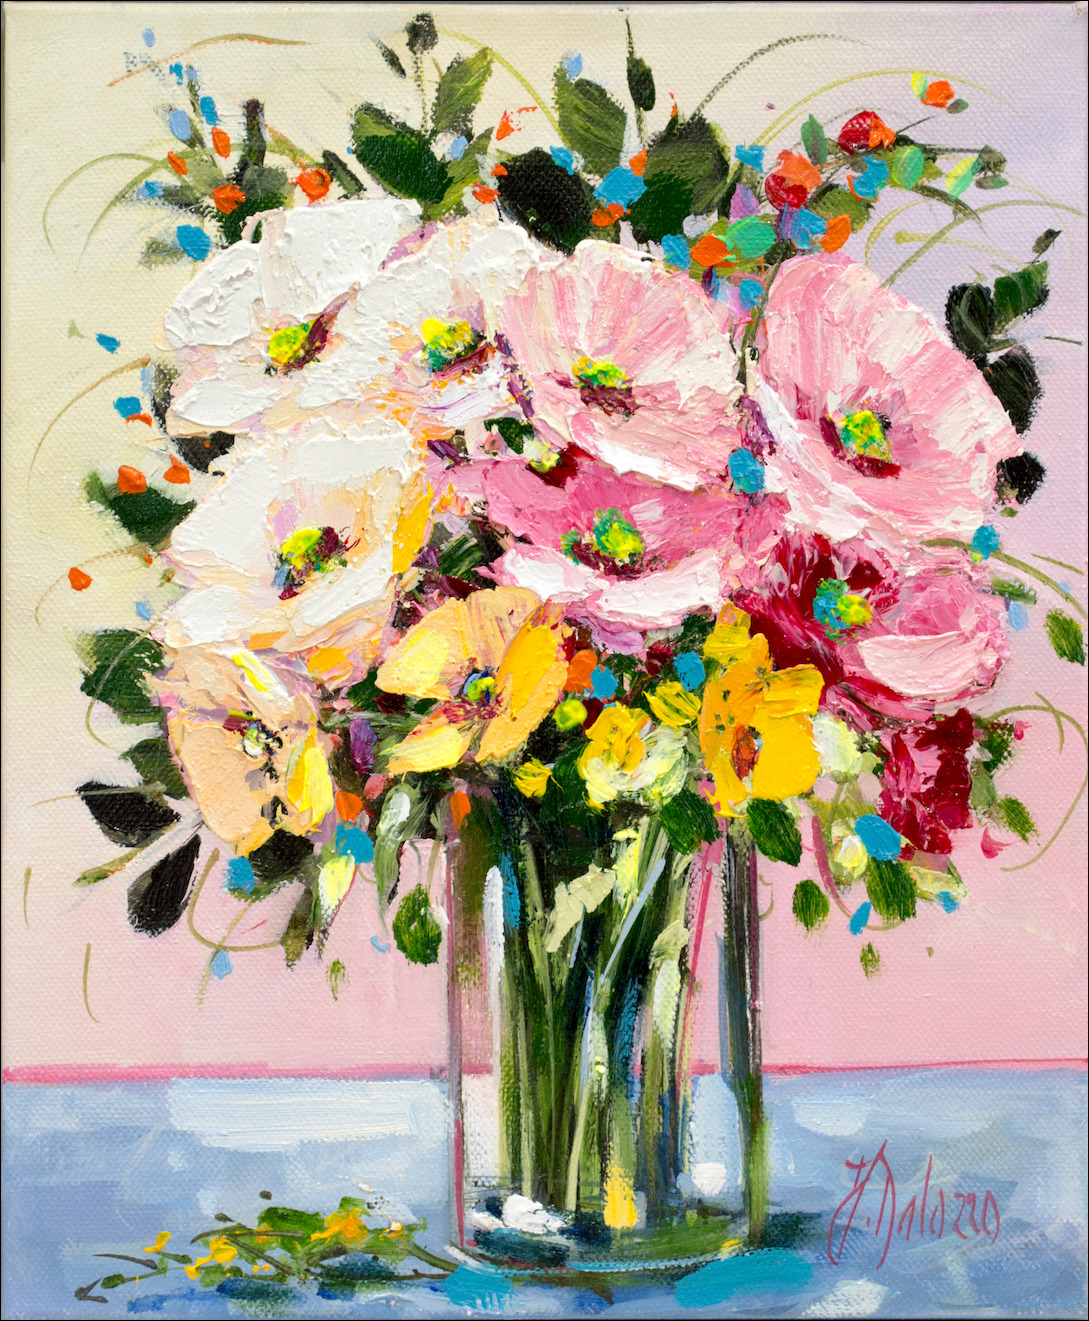 Floral Still Life Painting "Morning Pickings" by Judith Dalozzo